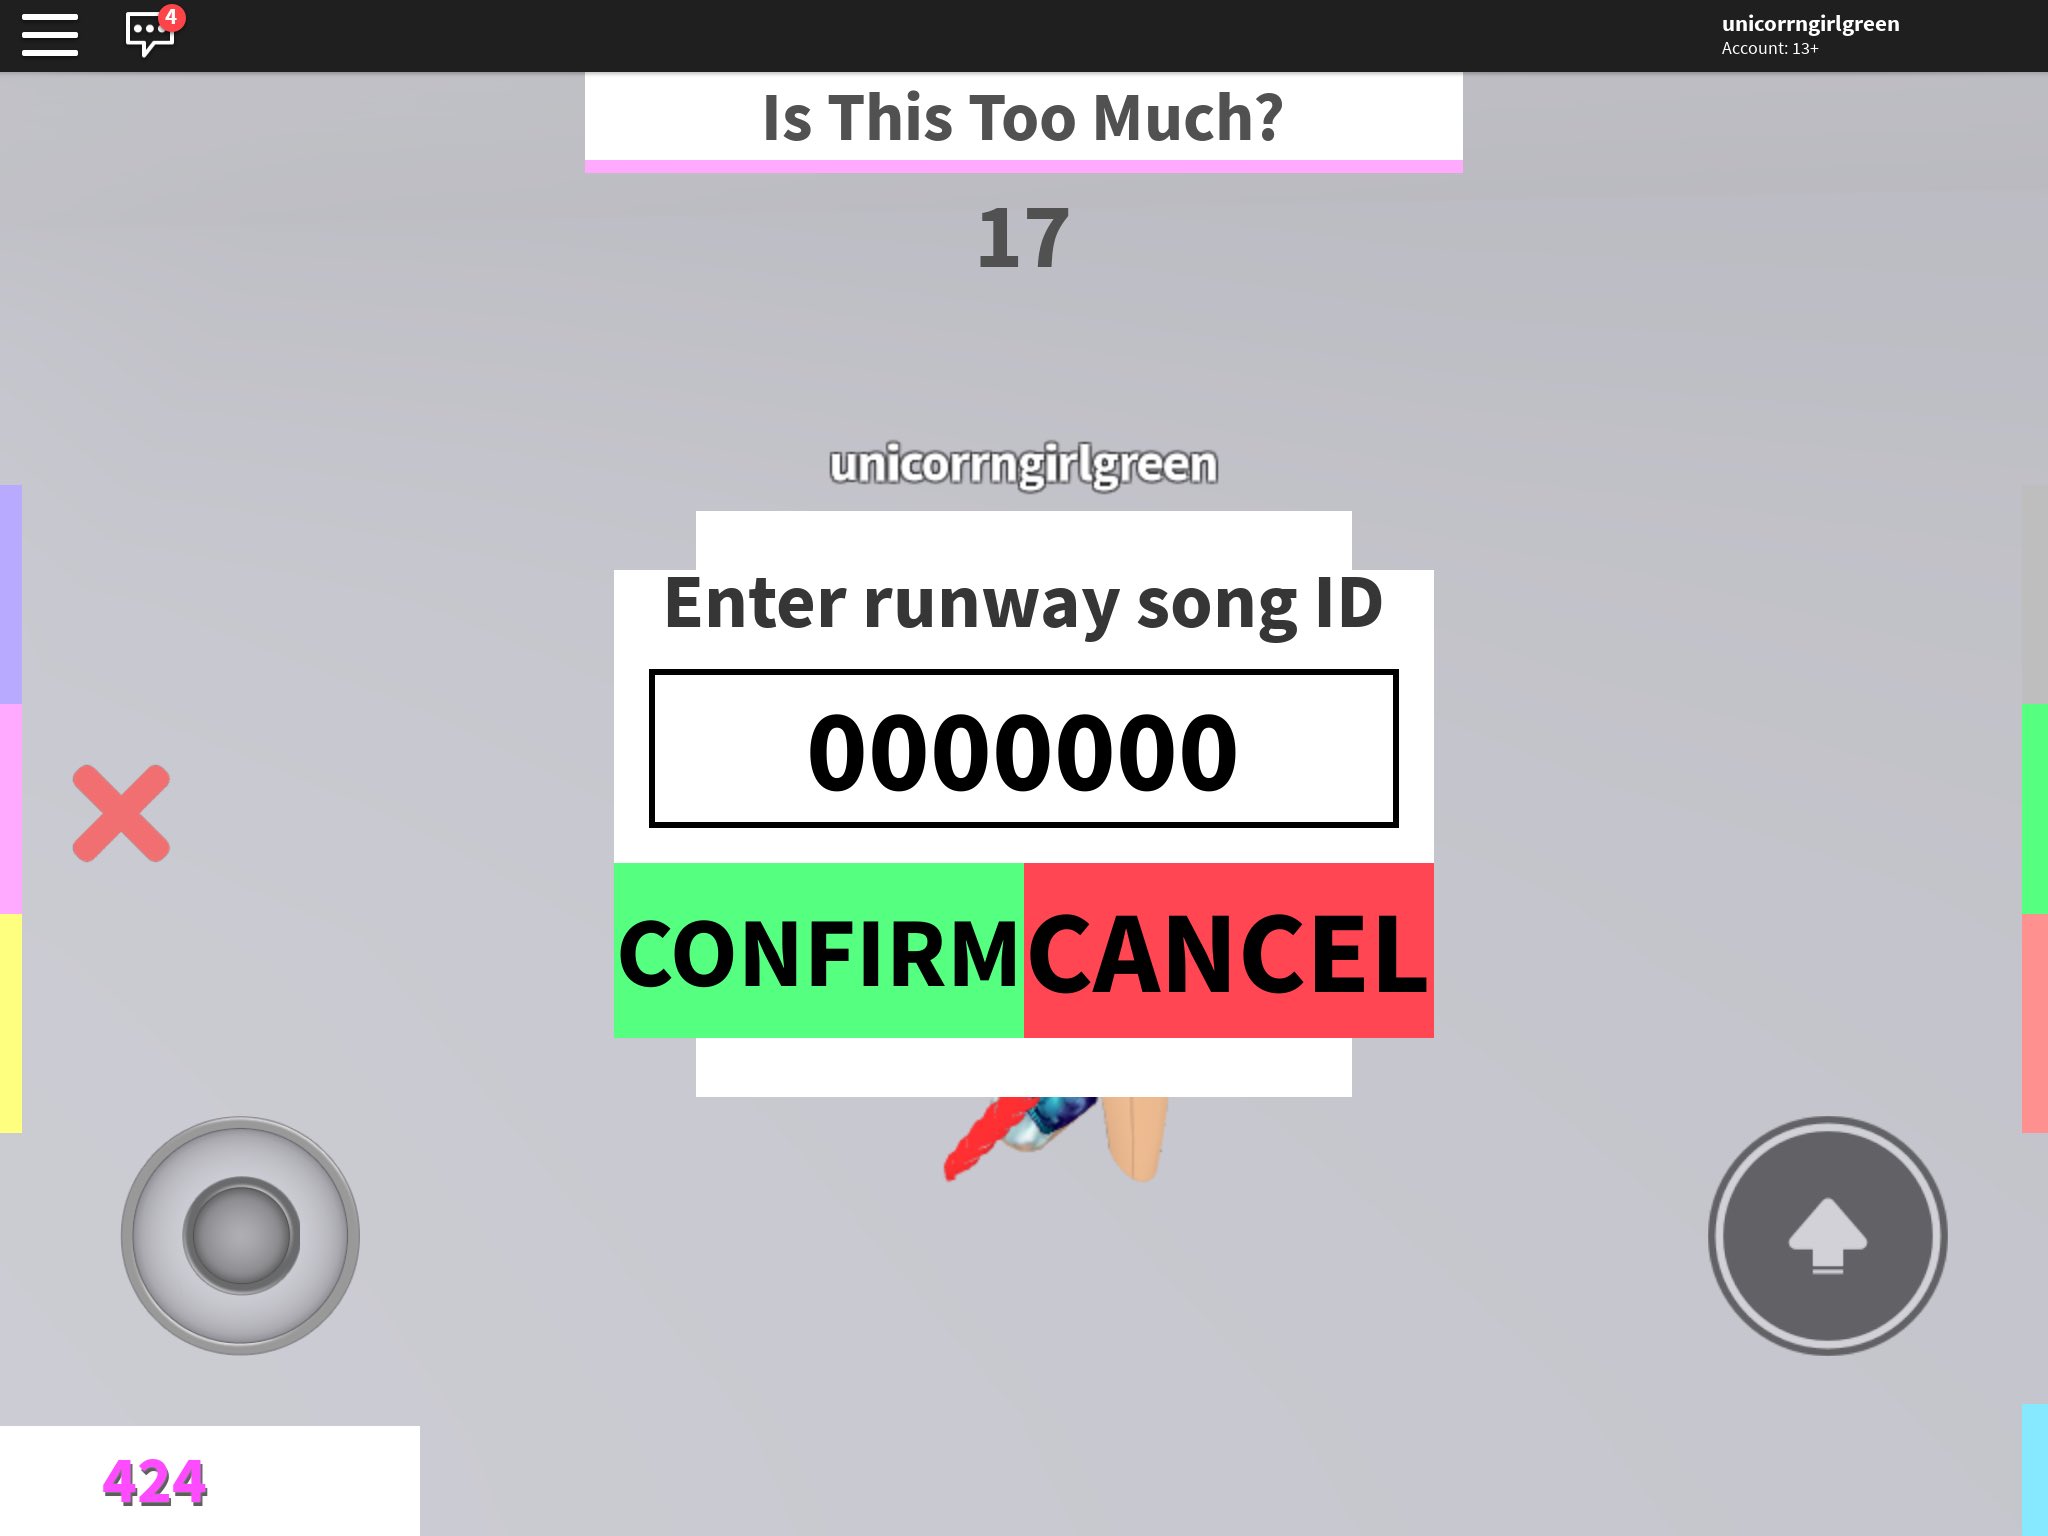 Tairis Rodriguez On Twitter Hii Roblox Peeps Hoping 1 Of U Can Point Me In The Right Direction There S A Persistant Pop Up On My Kids Ipad When She Plays I Am Not Sure - runway song codes for roblox fashion famous